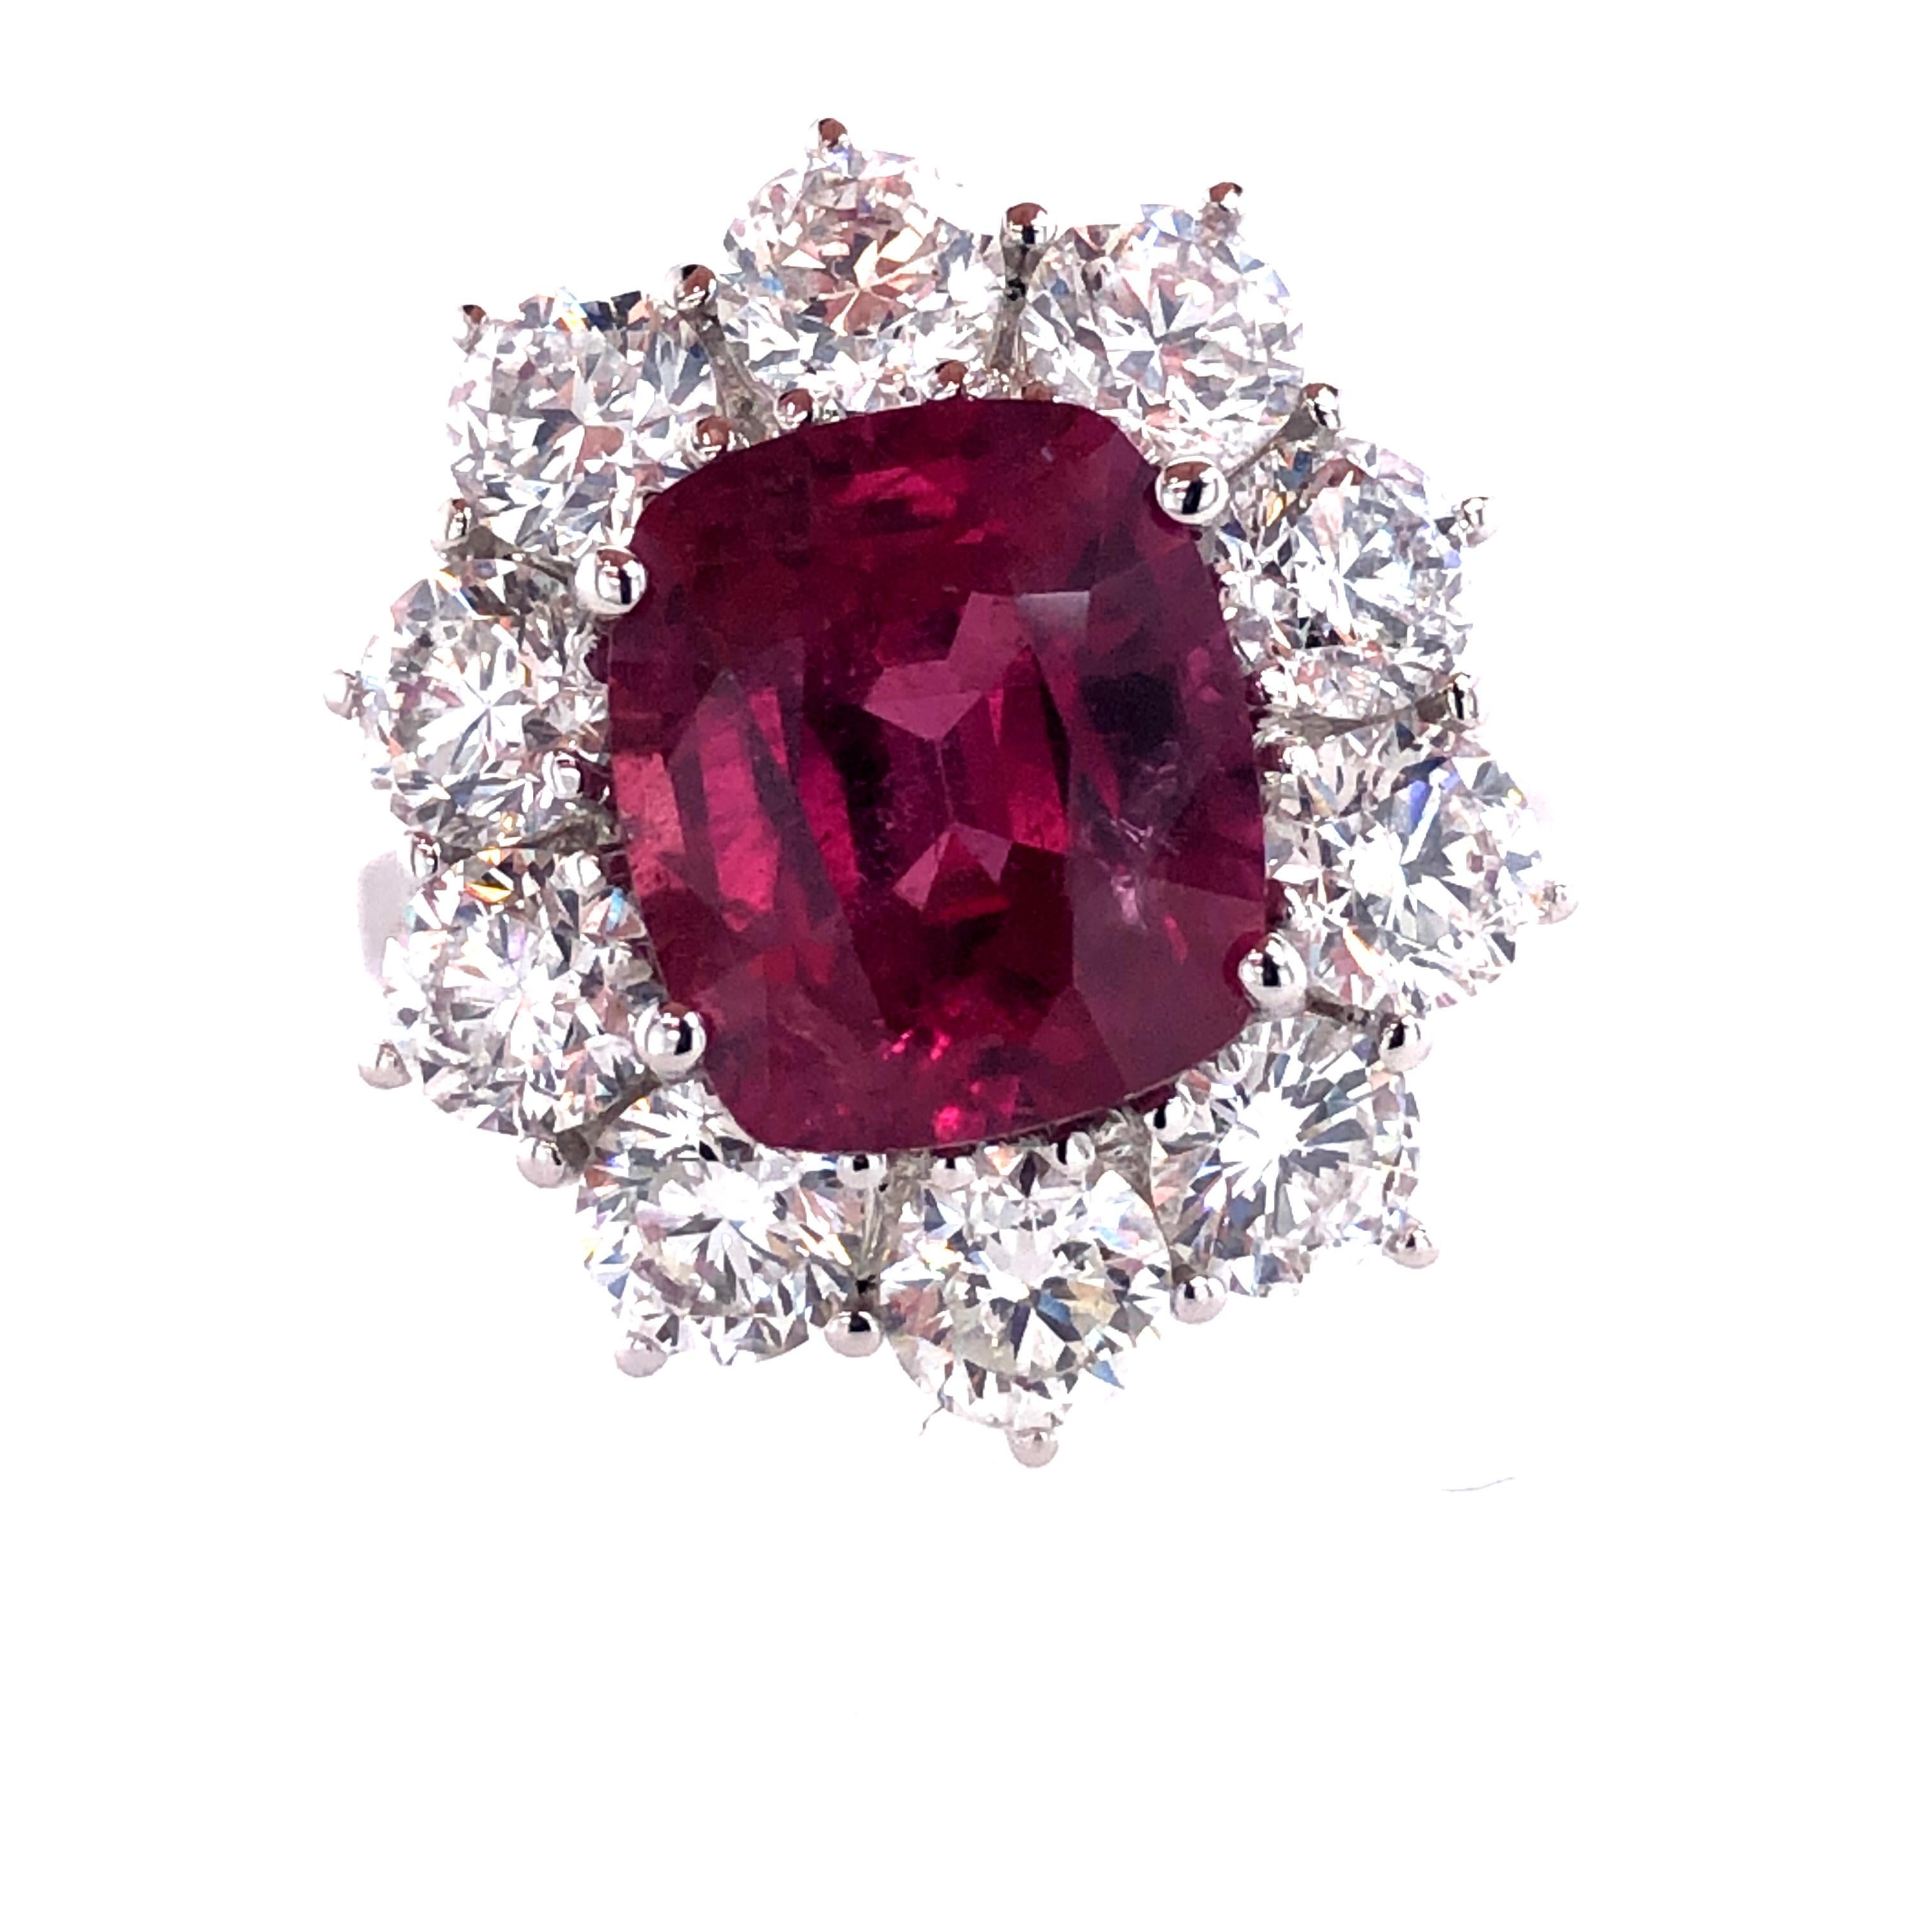 Offered here is a dazzling Ruby weighing 4.61 carats showcases its rich red color in this 18 kt white gold princess Diana Style ring. 
Framed with 10 natural earth mined excellent quality round diamonds weighing 2.95 carats total, averaging G-H in